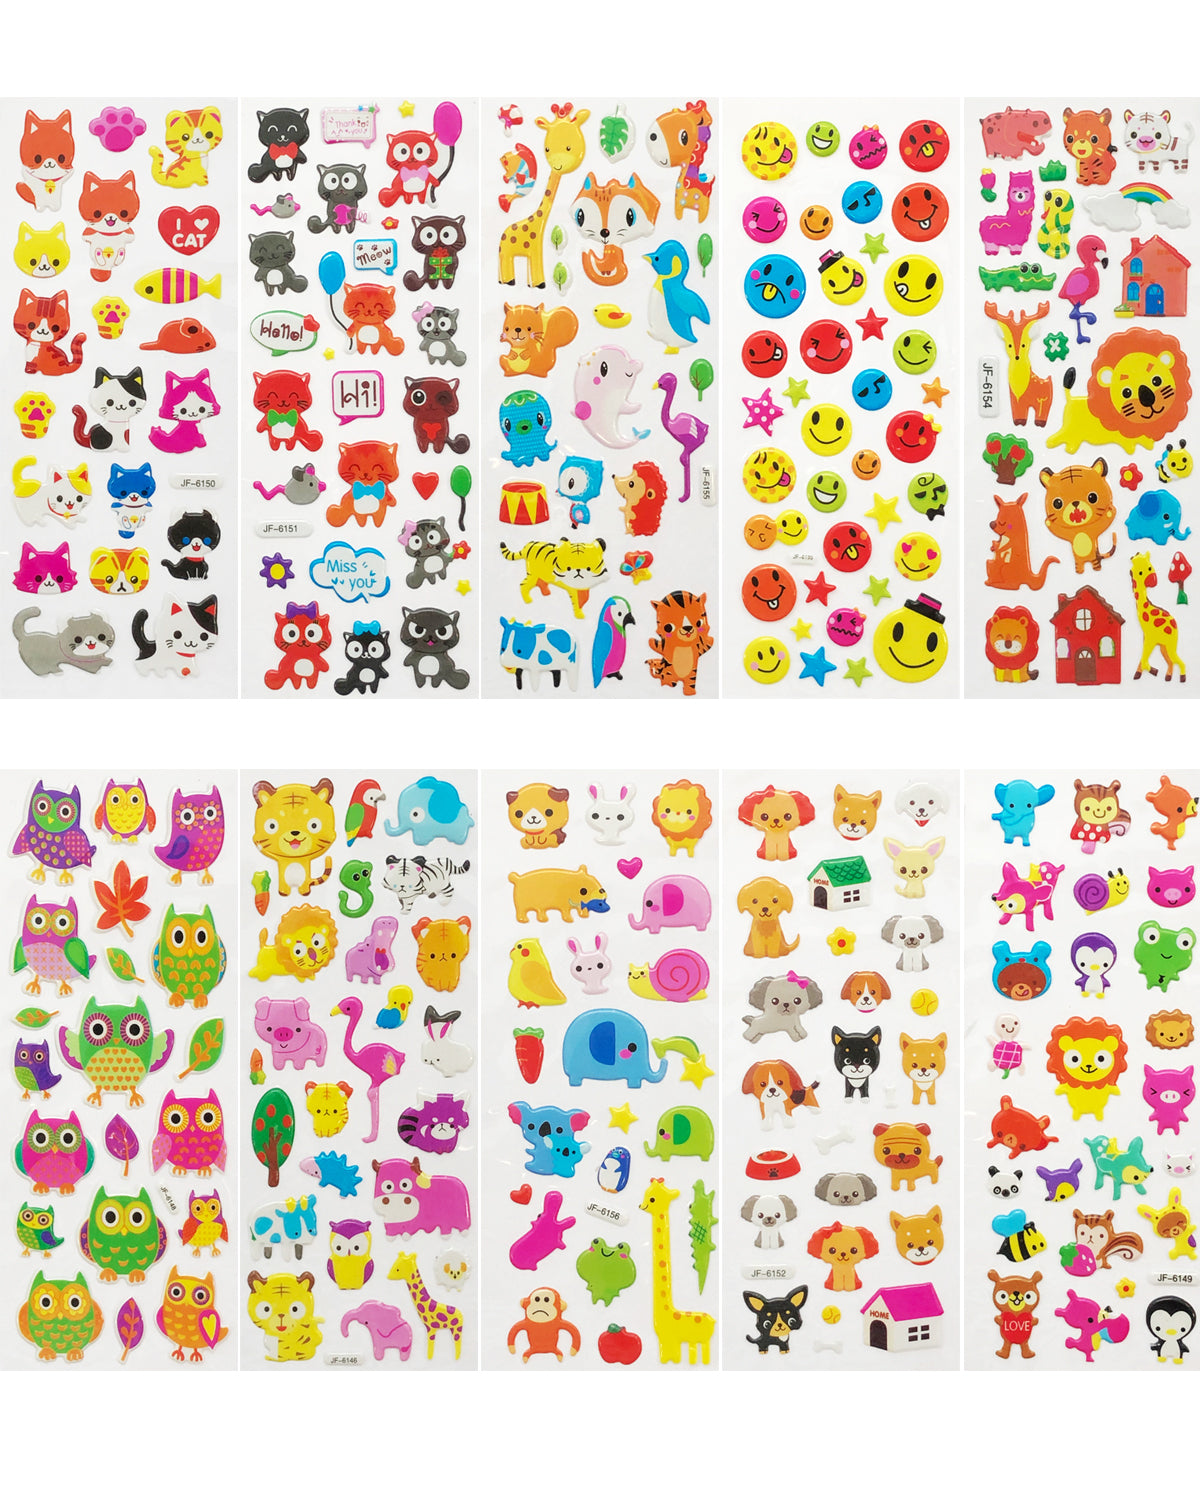 Incraftables Puffy Stickers for Girls 48 Sheets. Self Adhesive 3D